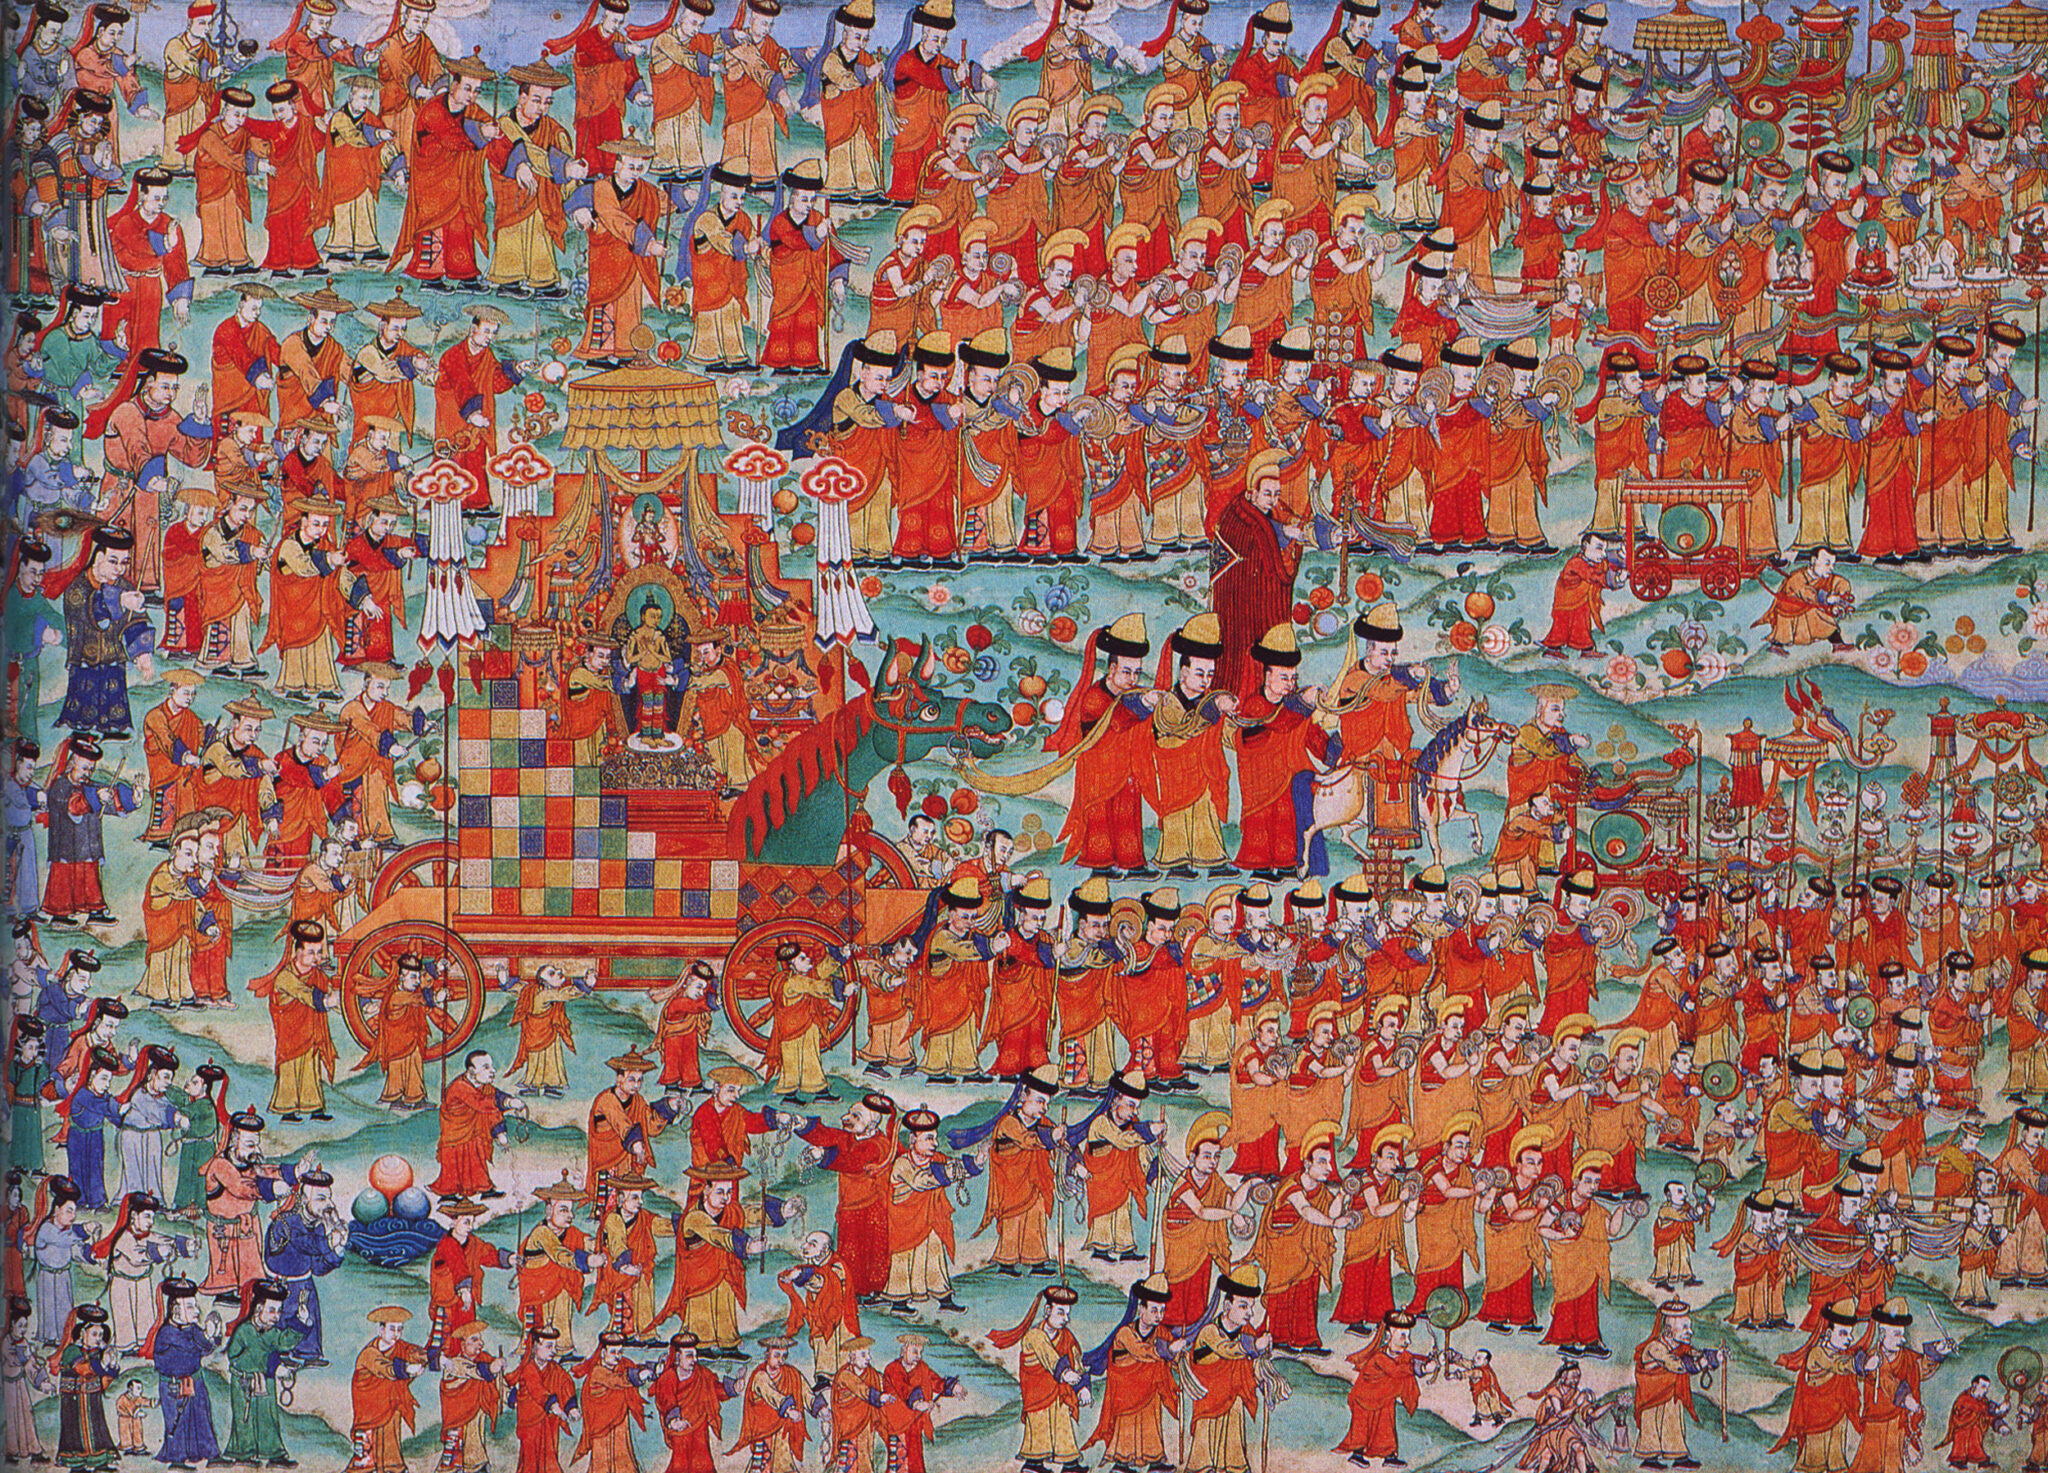 Scores of figures dressed in red form long, snaking line; group of blue-robed figures stands at left